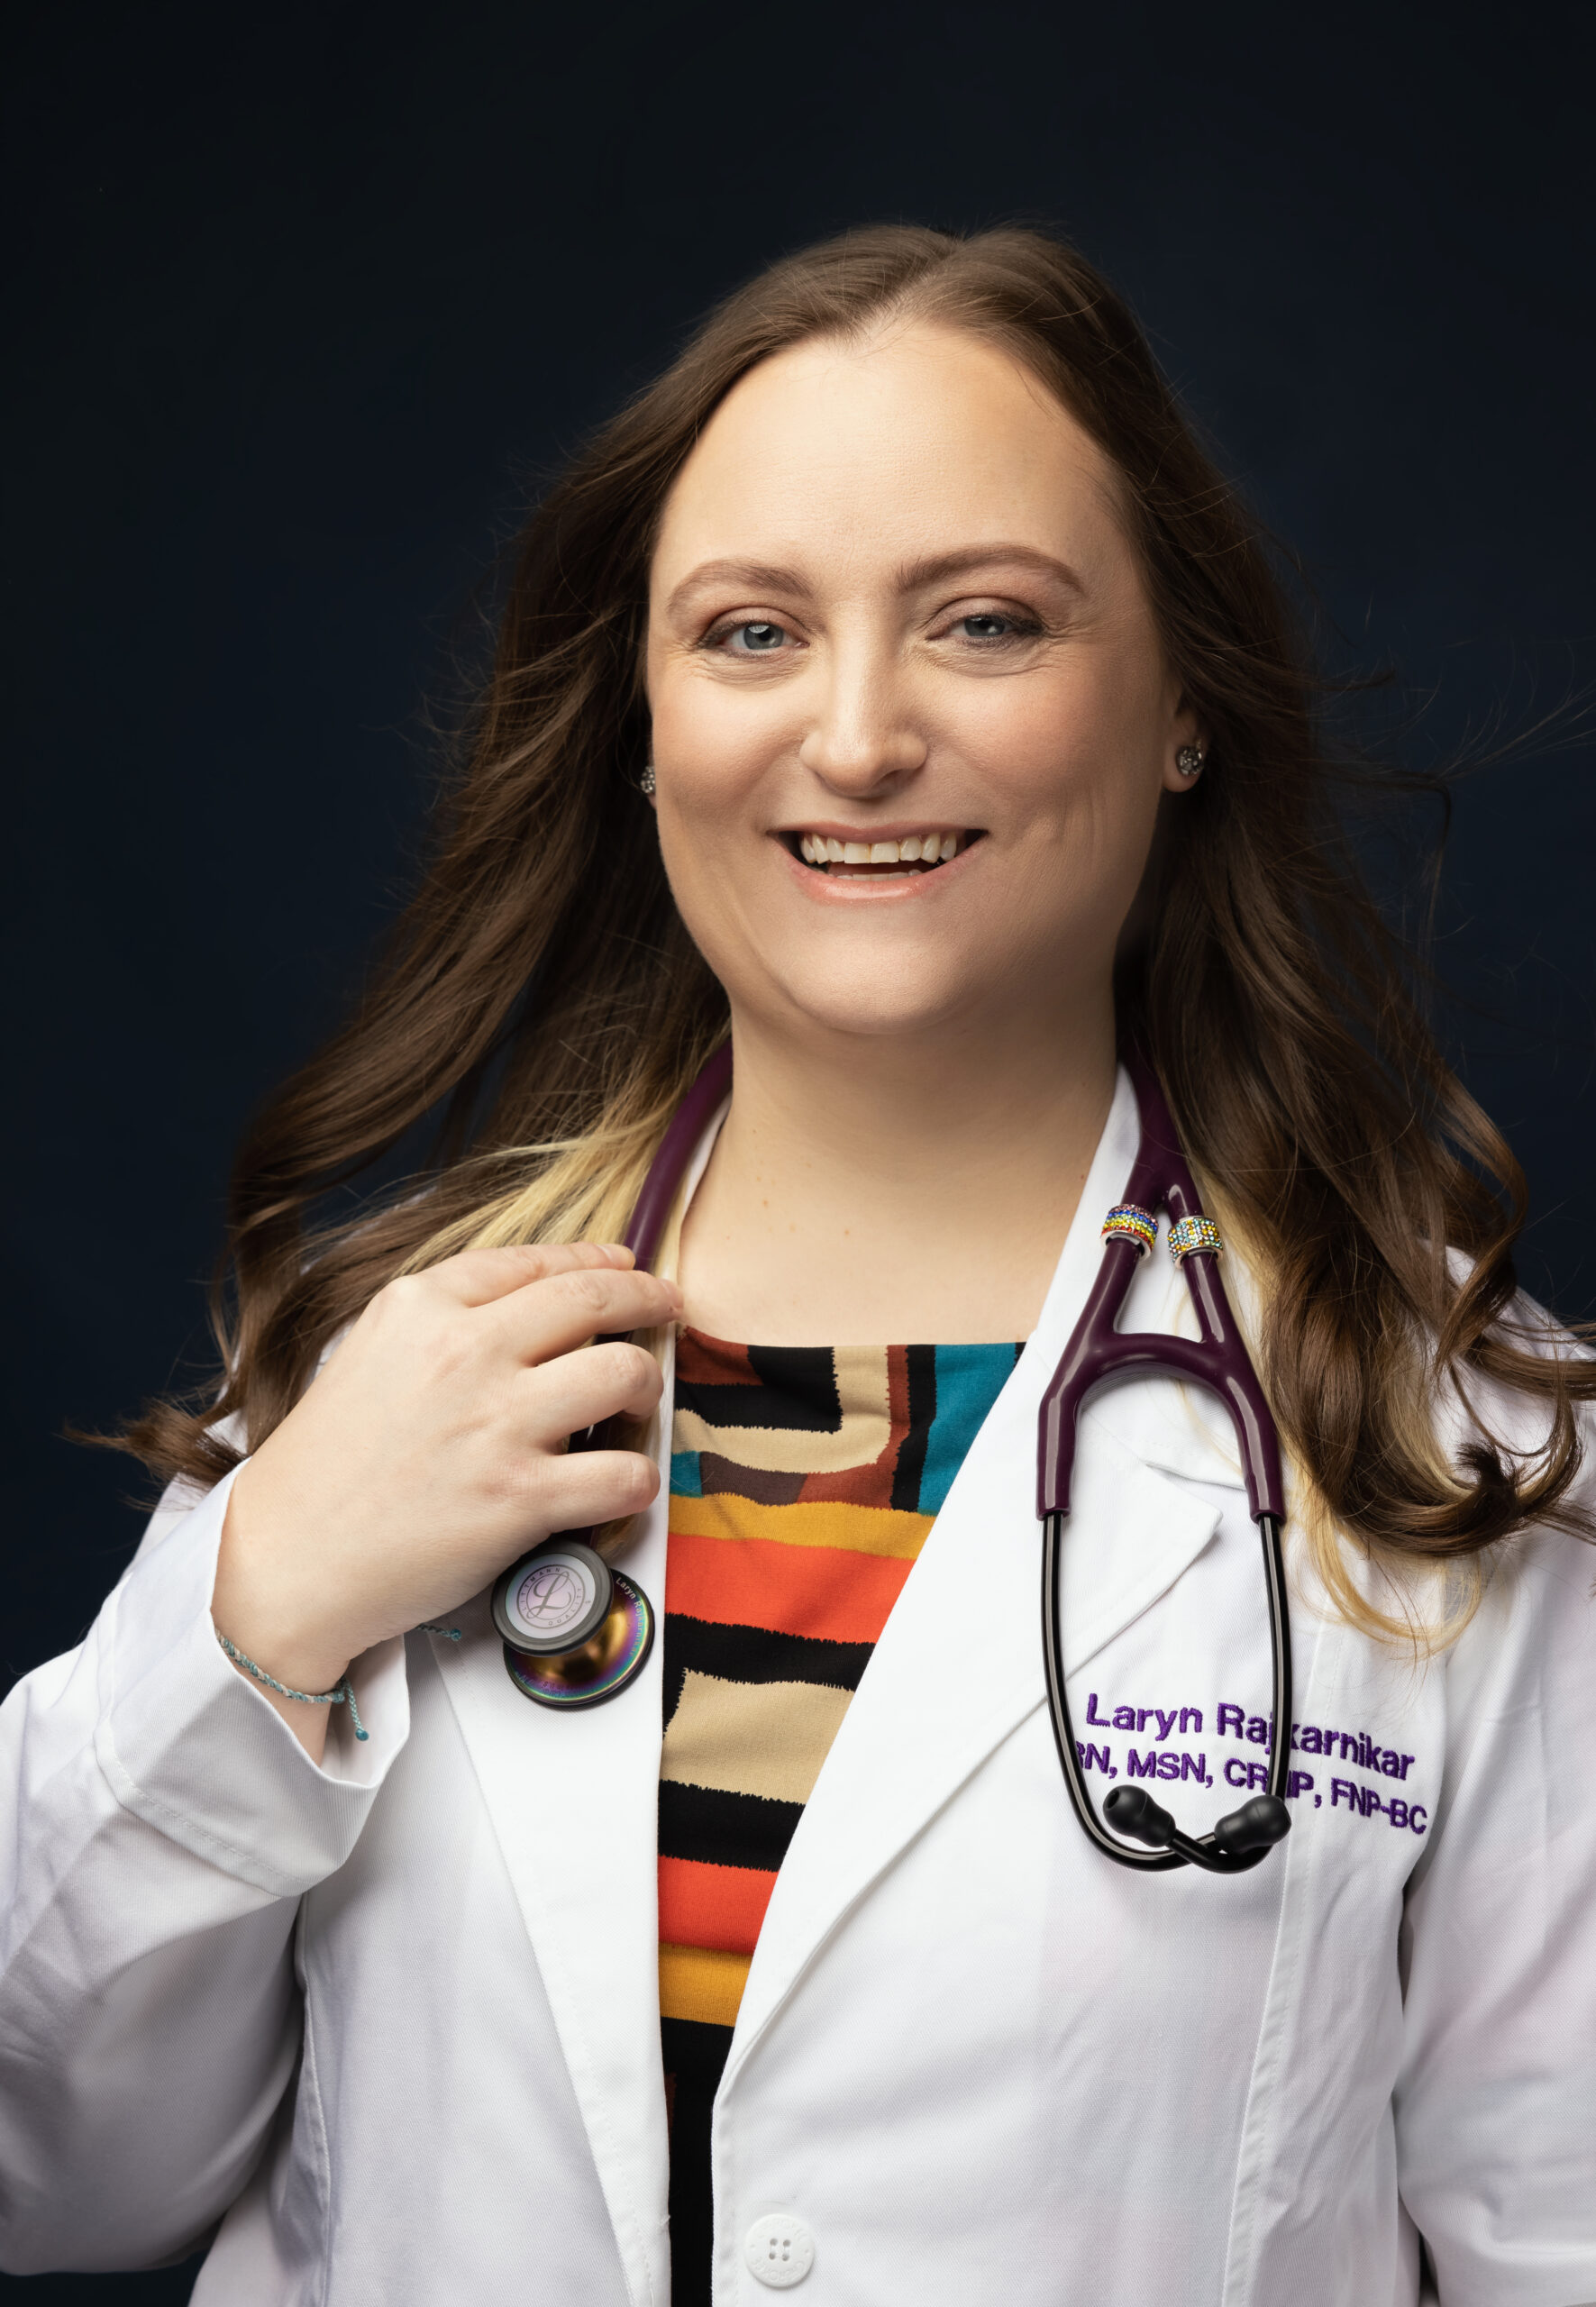 Laryn Rajnikarnikar is a smiling woman wearing a white lab coat over a striped shirt. She has dark hair and a stethoscope slung over her neck.